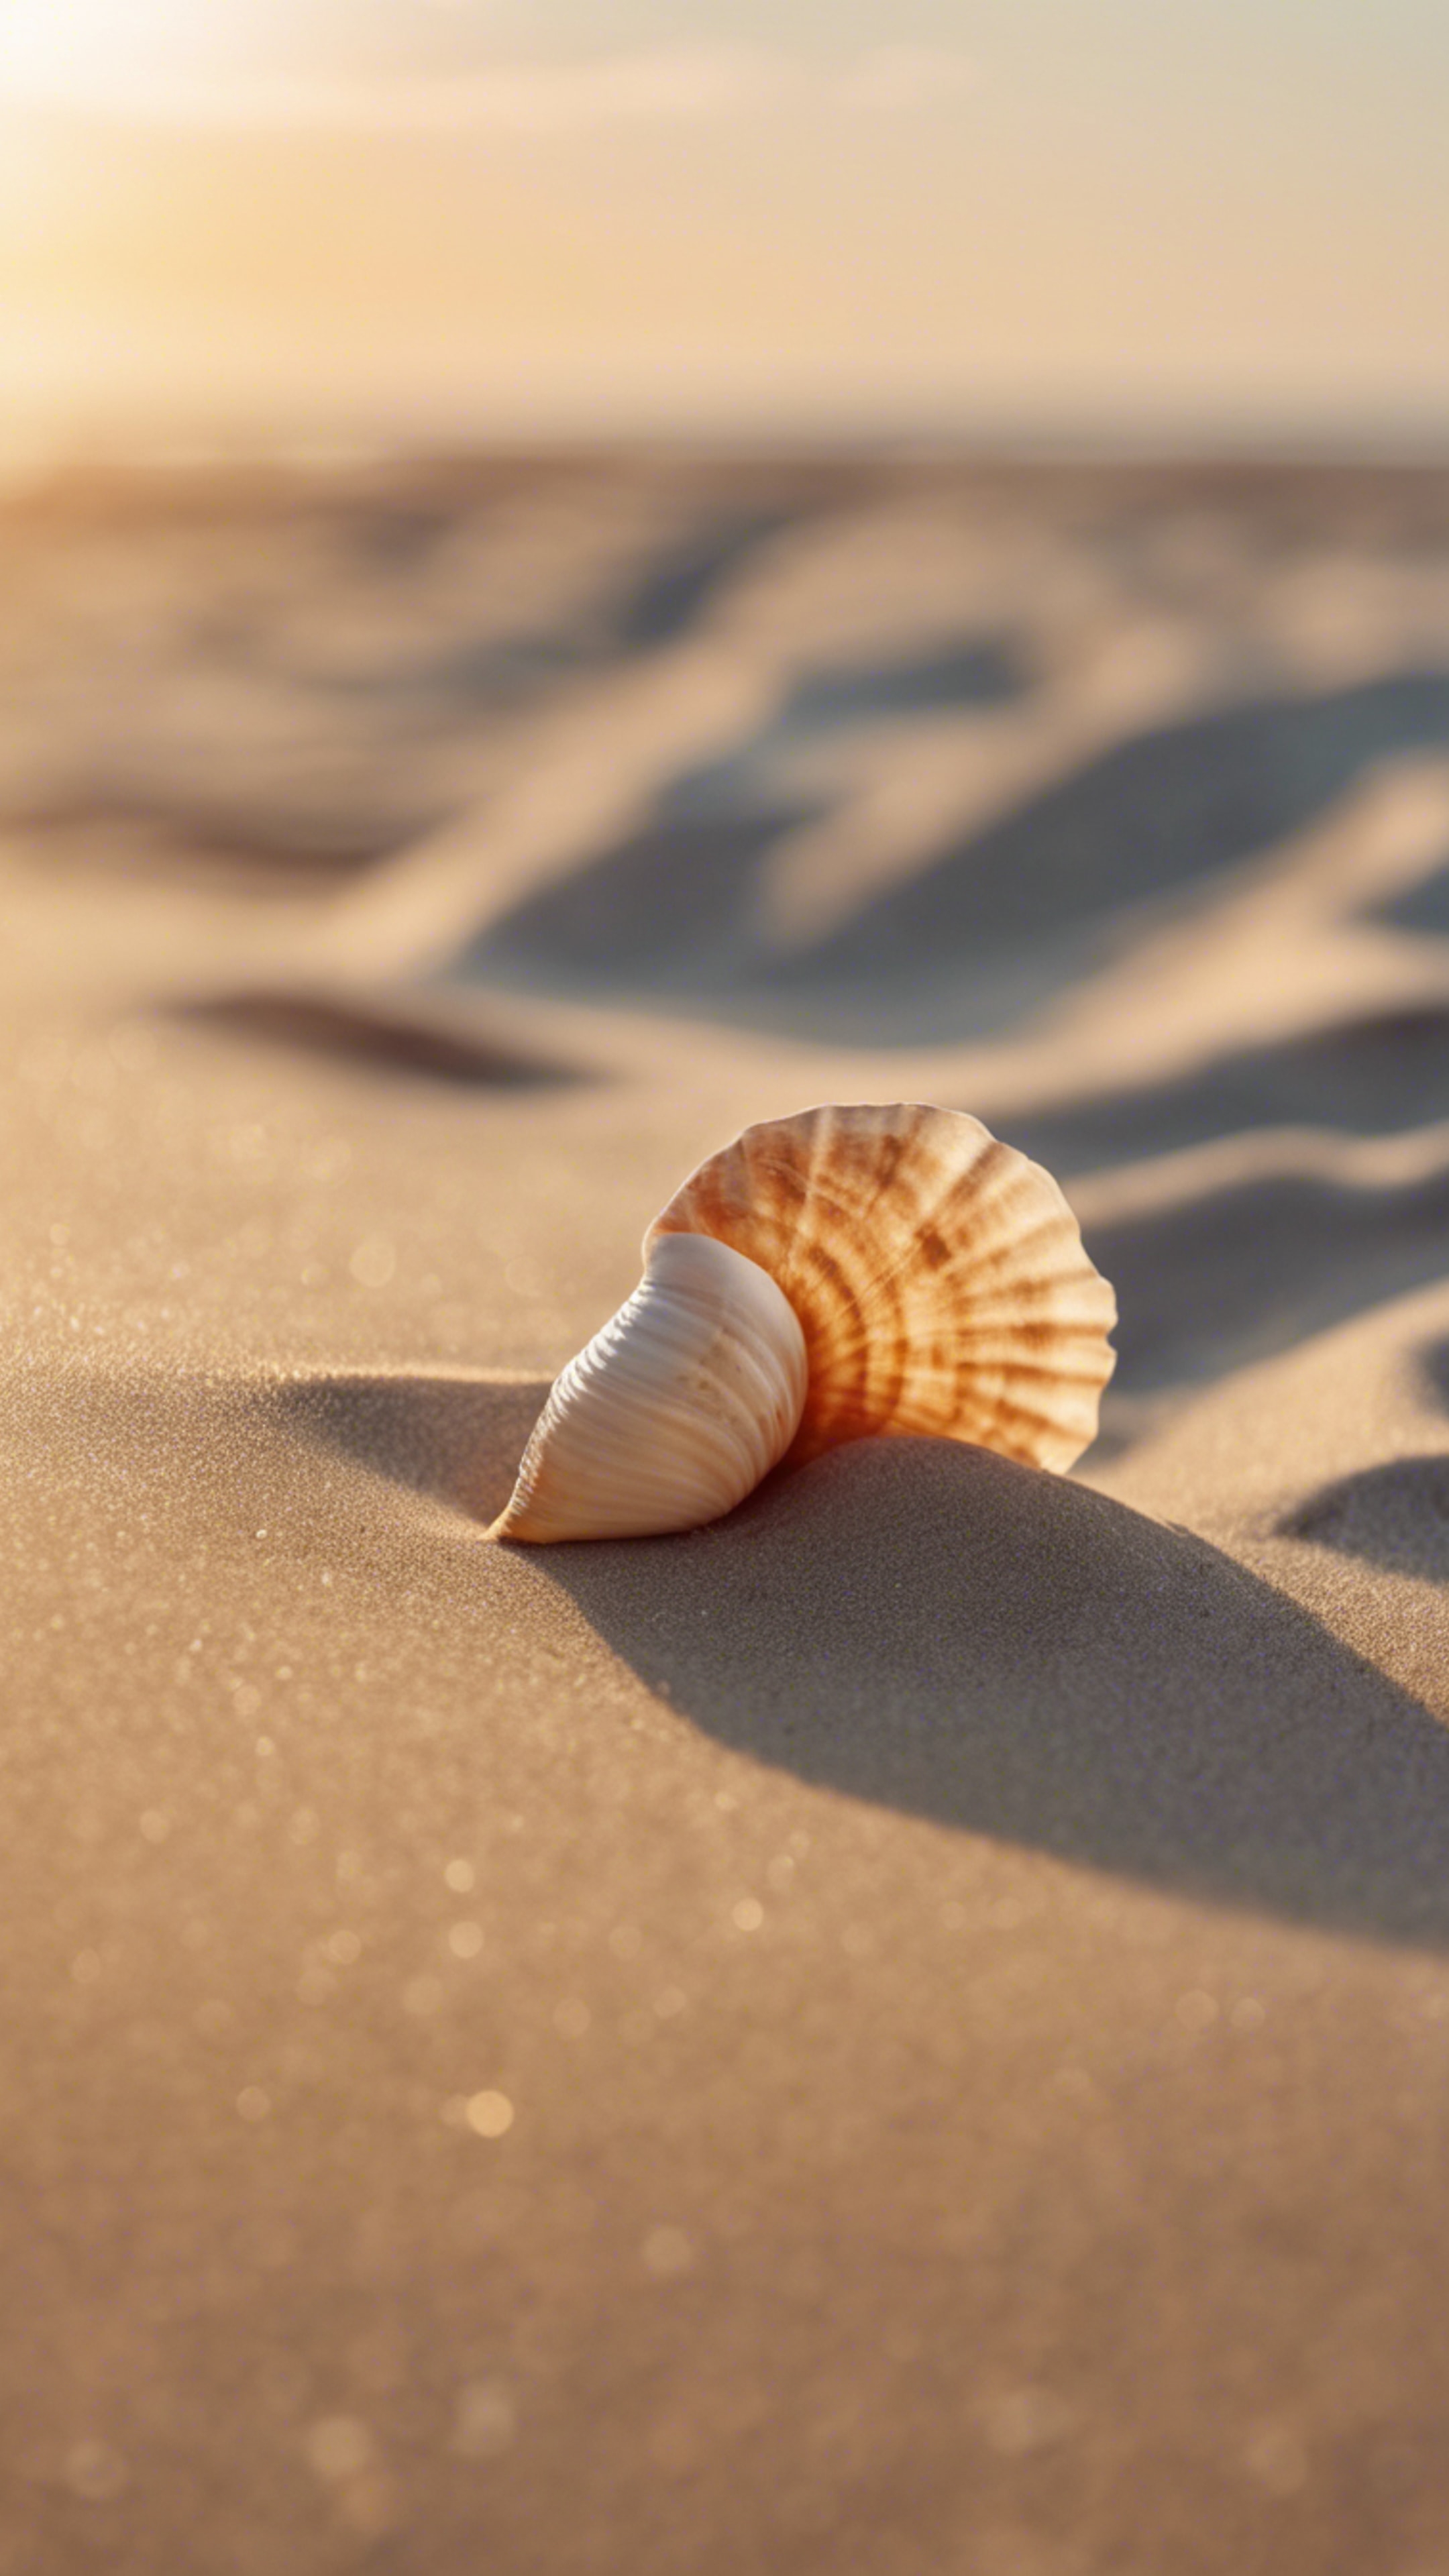 A sandy beach at sunrise, with a lonely seashell on the smooth, cool beige sand. Ταπετσαρία[f397365f3b8642f18a02]